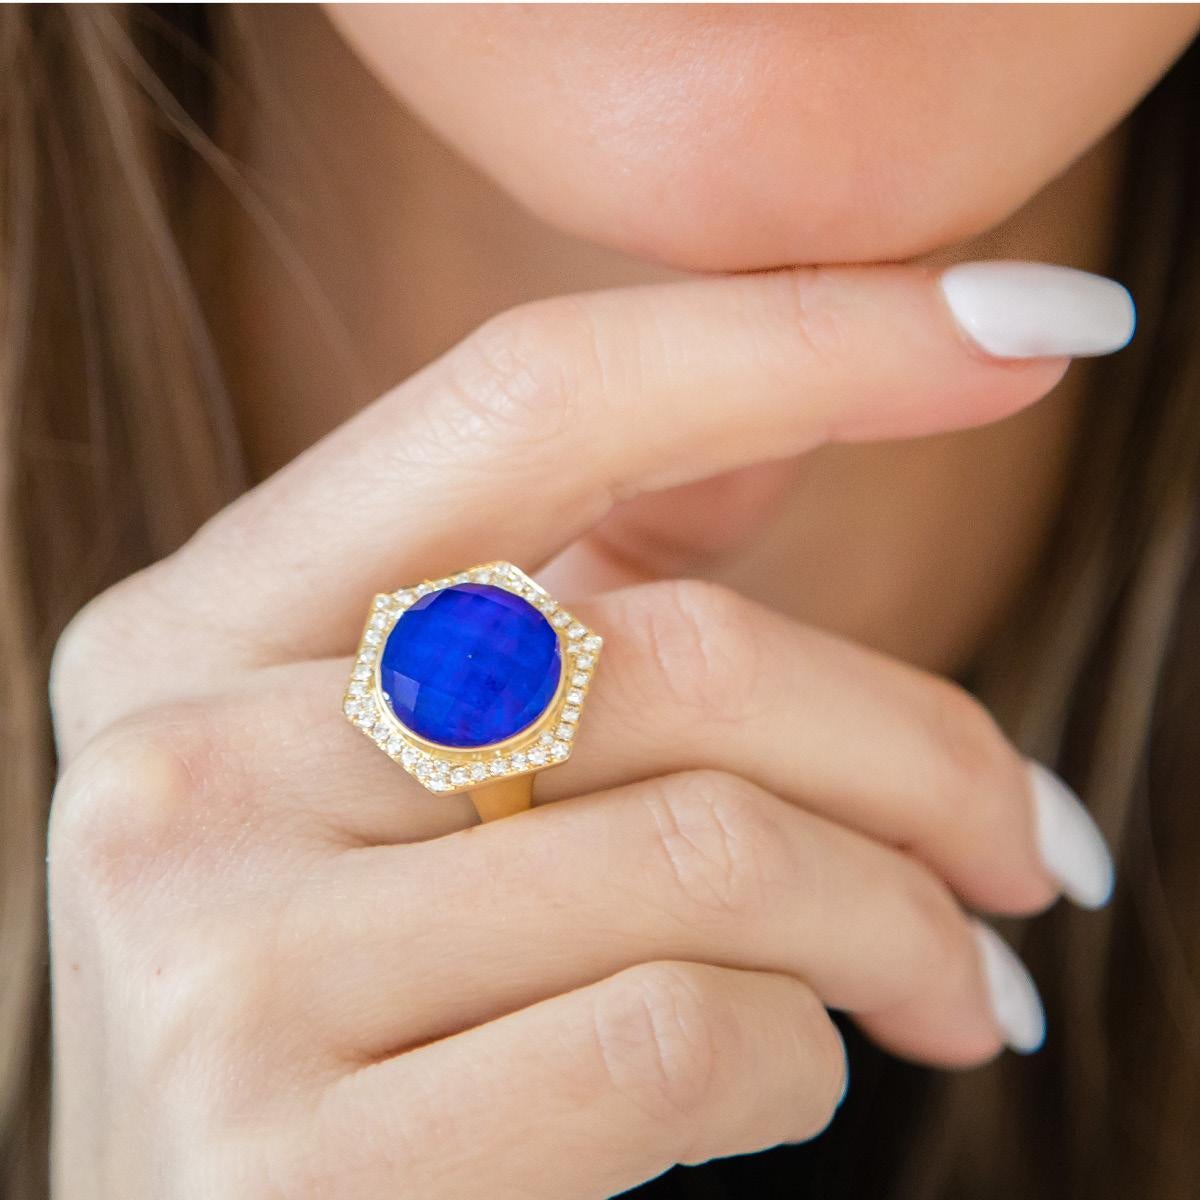 Royal Lapis collection Cocktail Ring featuring a round 